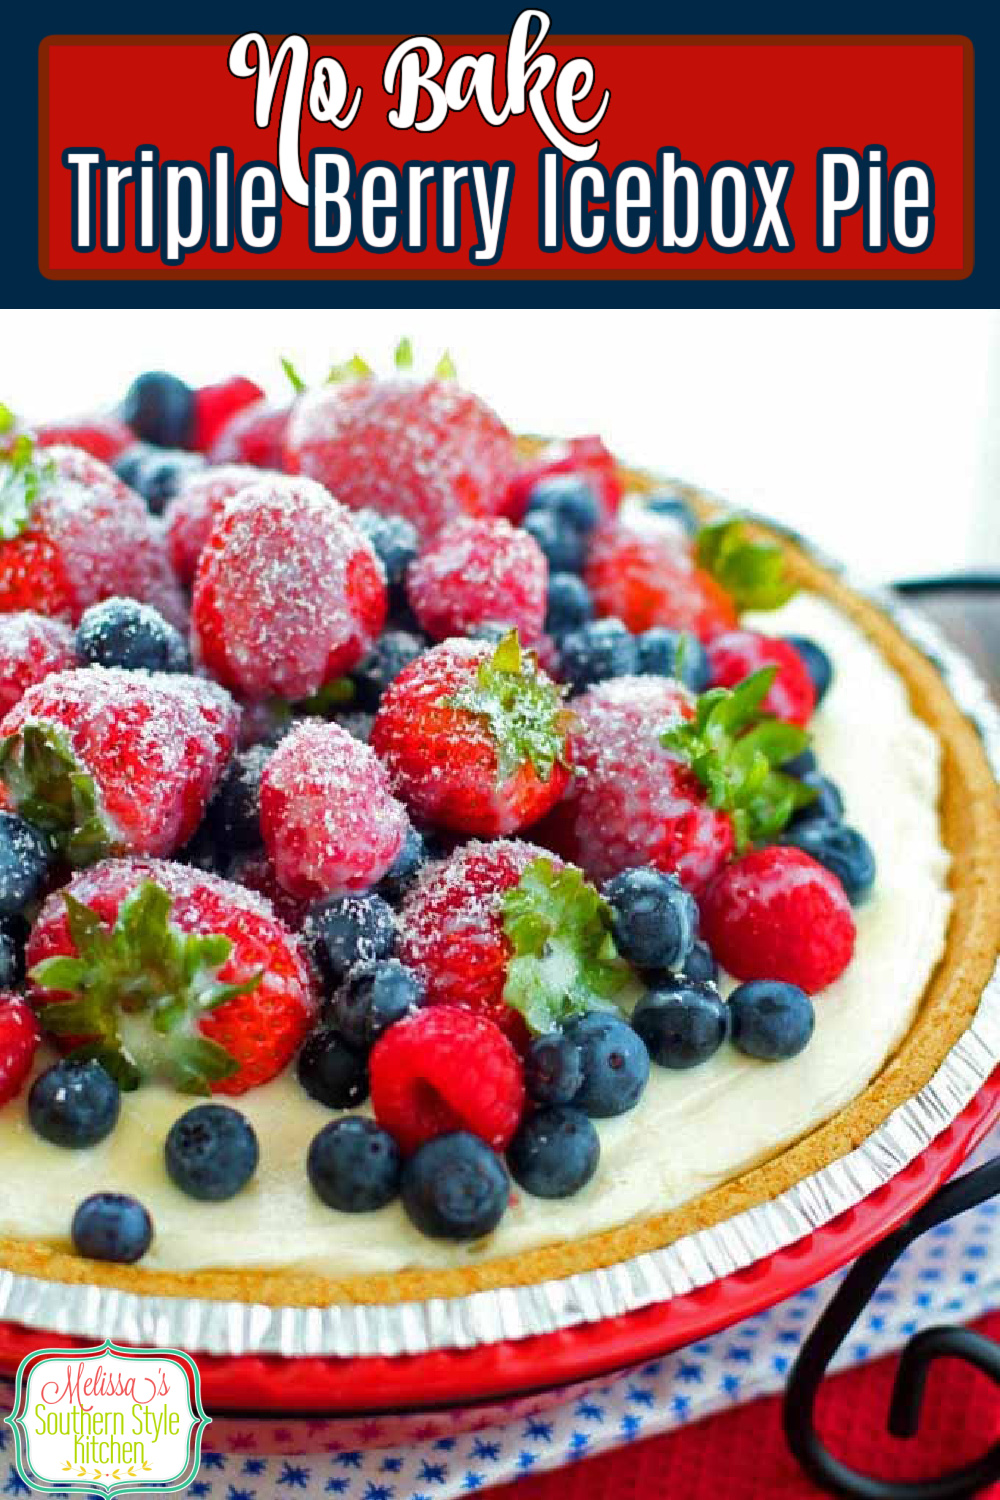 Top this decadent No Bake Triple Berry Icebox Pie with a drizzle of warm white chocolate and grated white chocolate bar for the finish #nobakepie #iceboxpie #tripleberry #tripleberrypie #freshberries #berrypie #blueberries #strawberries #pierecipes #desserts #desssertfoodrecipes #sweets #southernfood #southernrecipes